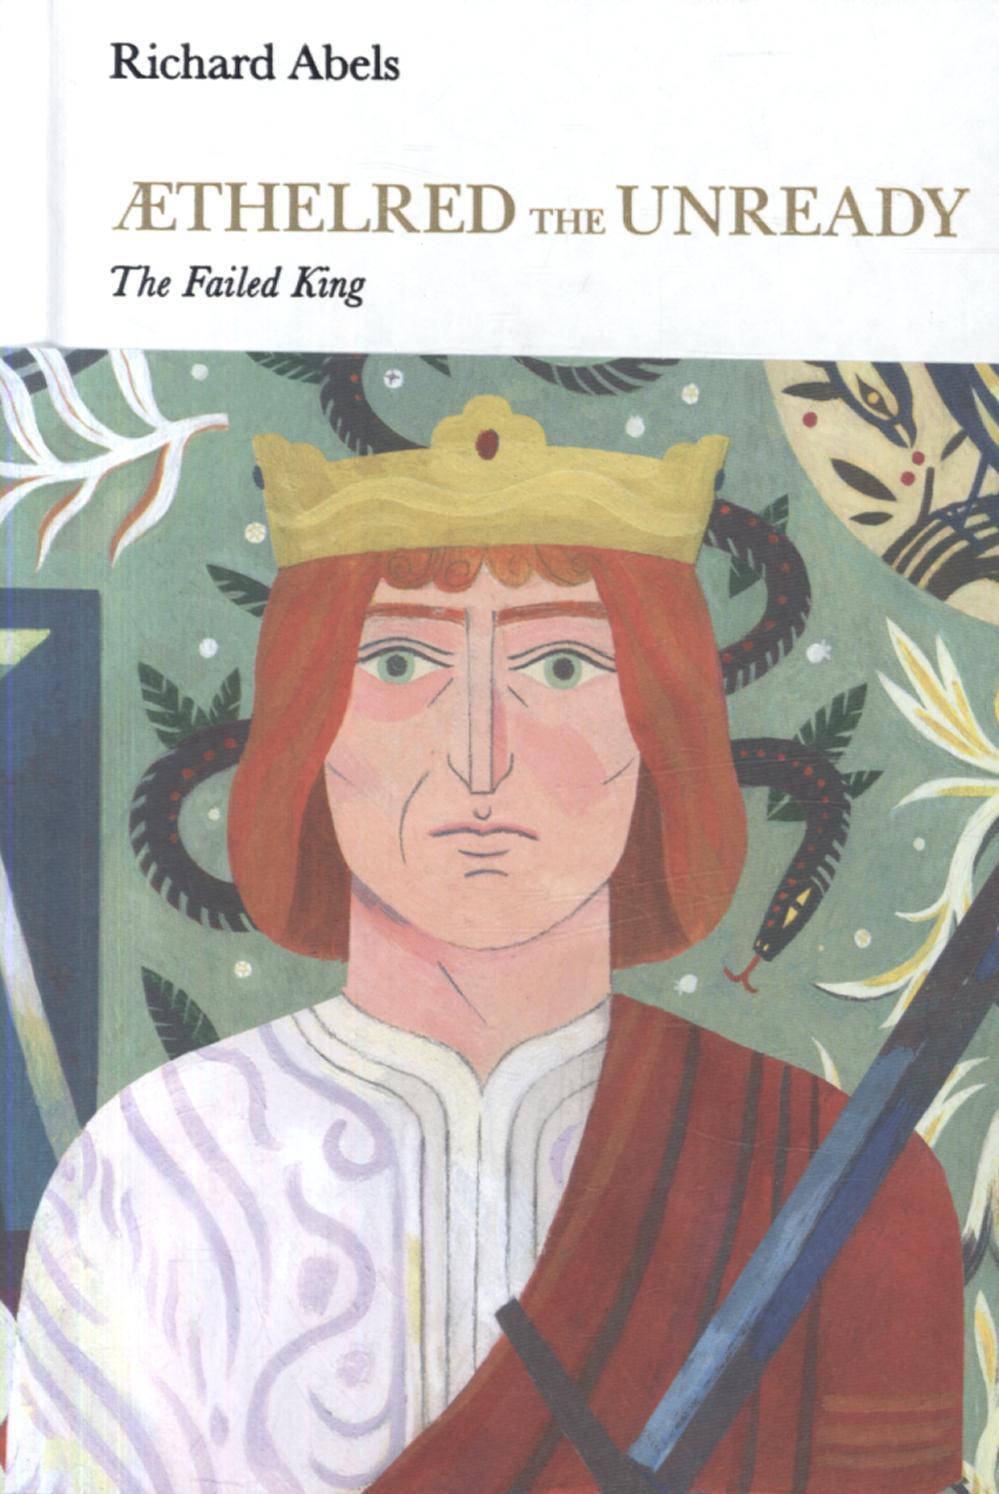 Aethelred the Unready (Penguin Monarchs) - Richard Abels